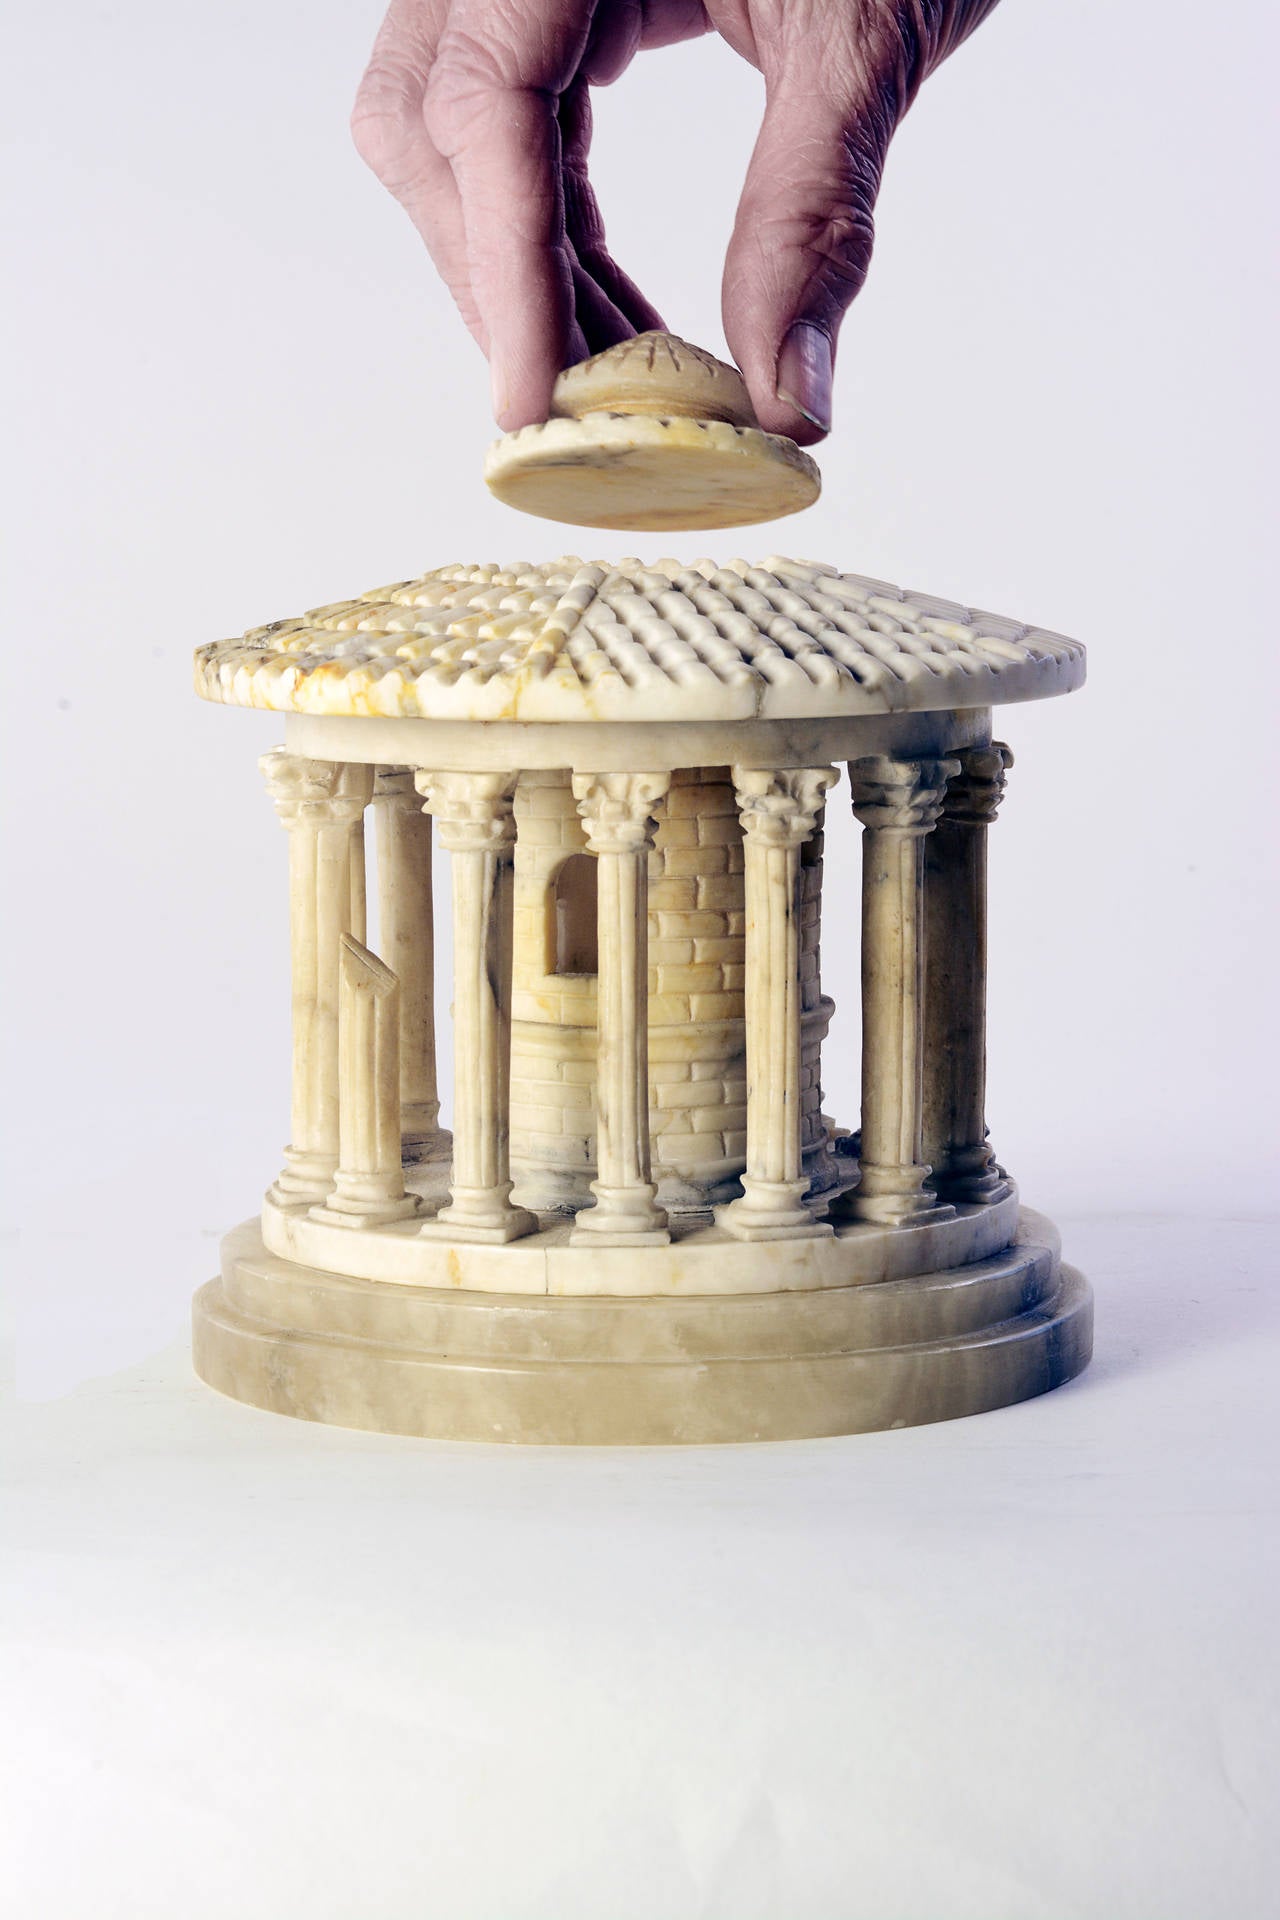 This impressive stone replica of the ancient Roman landmark is unusually detailed. Because all 19th century stone architectural souvenirs are hand carved, artisans were free to make what they wanted. This alabaster model of the Temple of Hercules